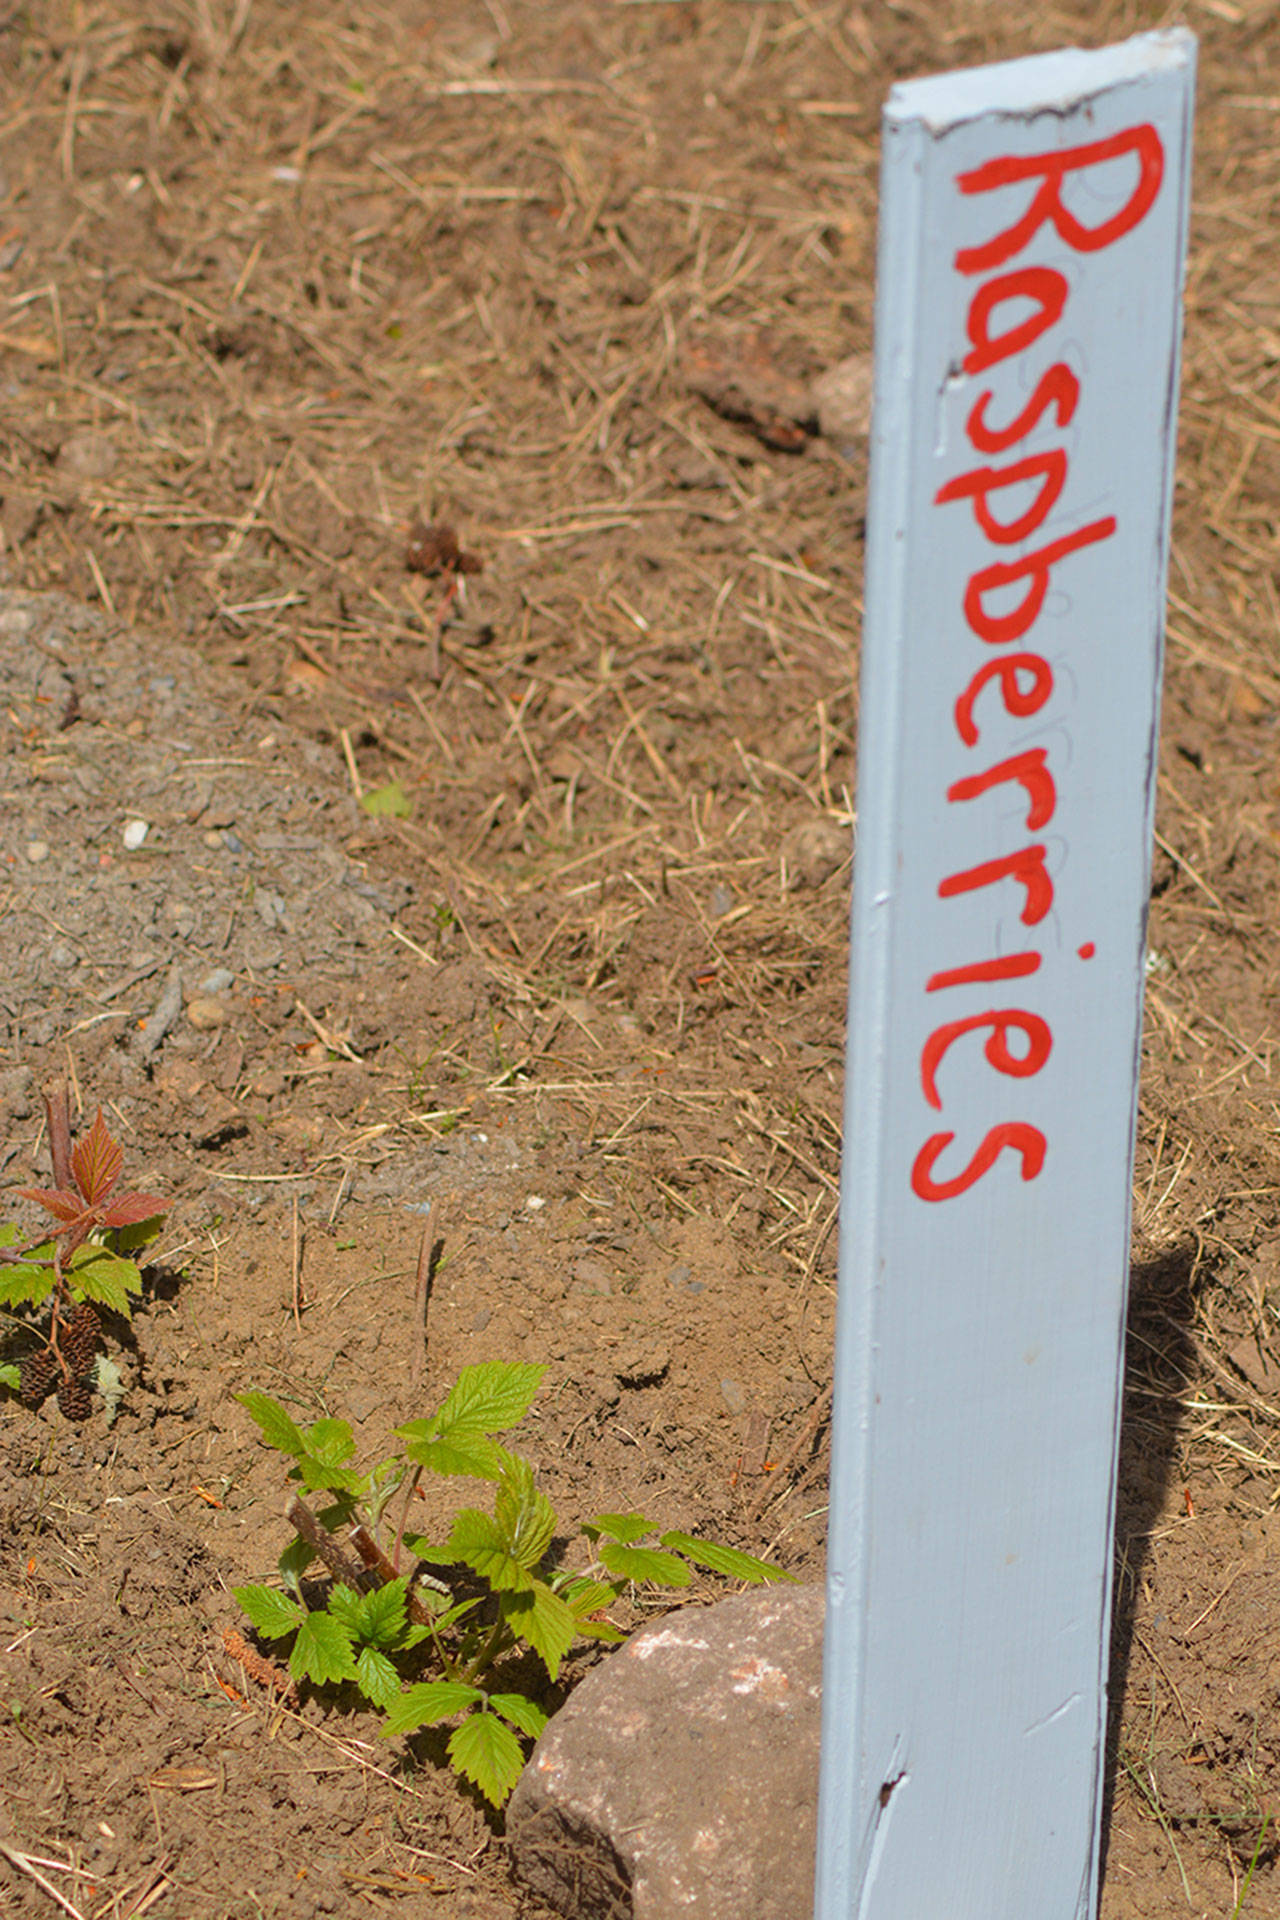 Raspberries are planted in the community garden.